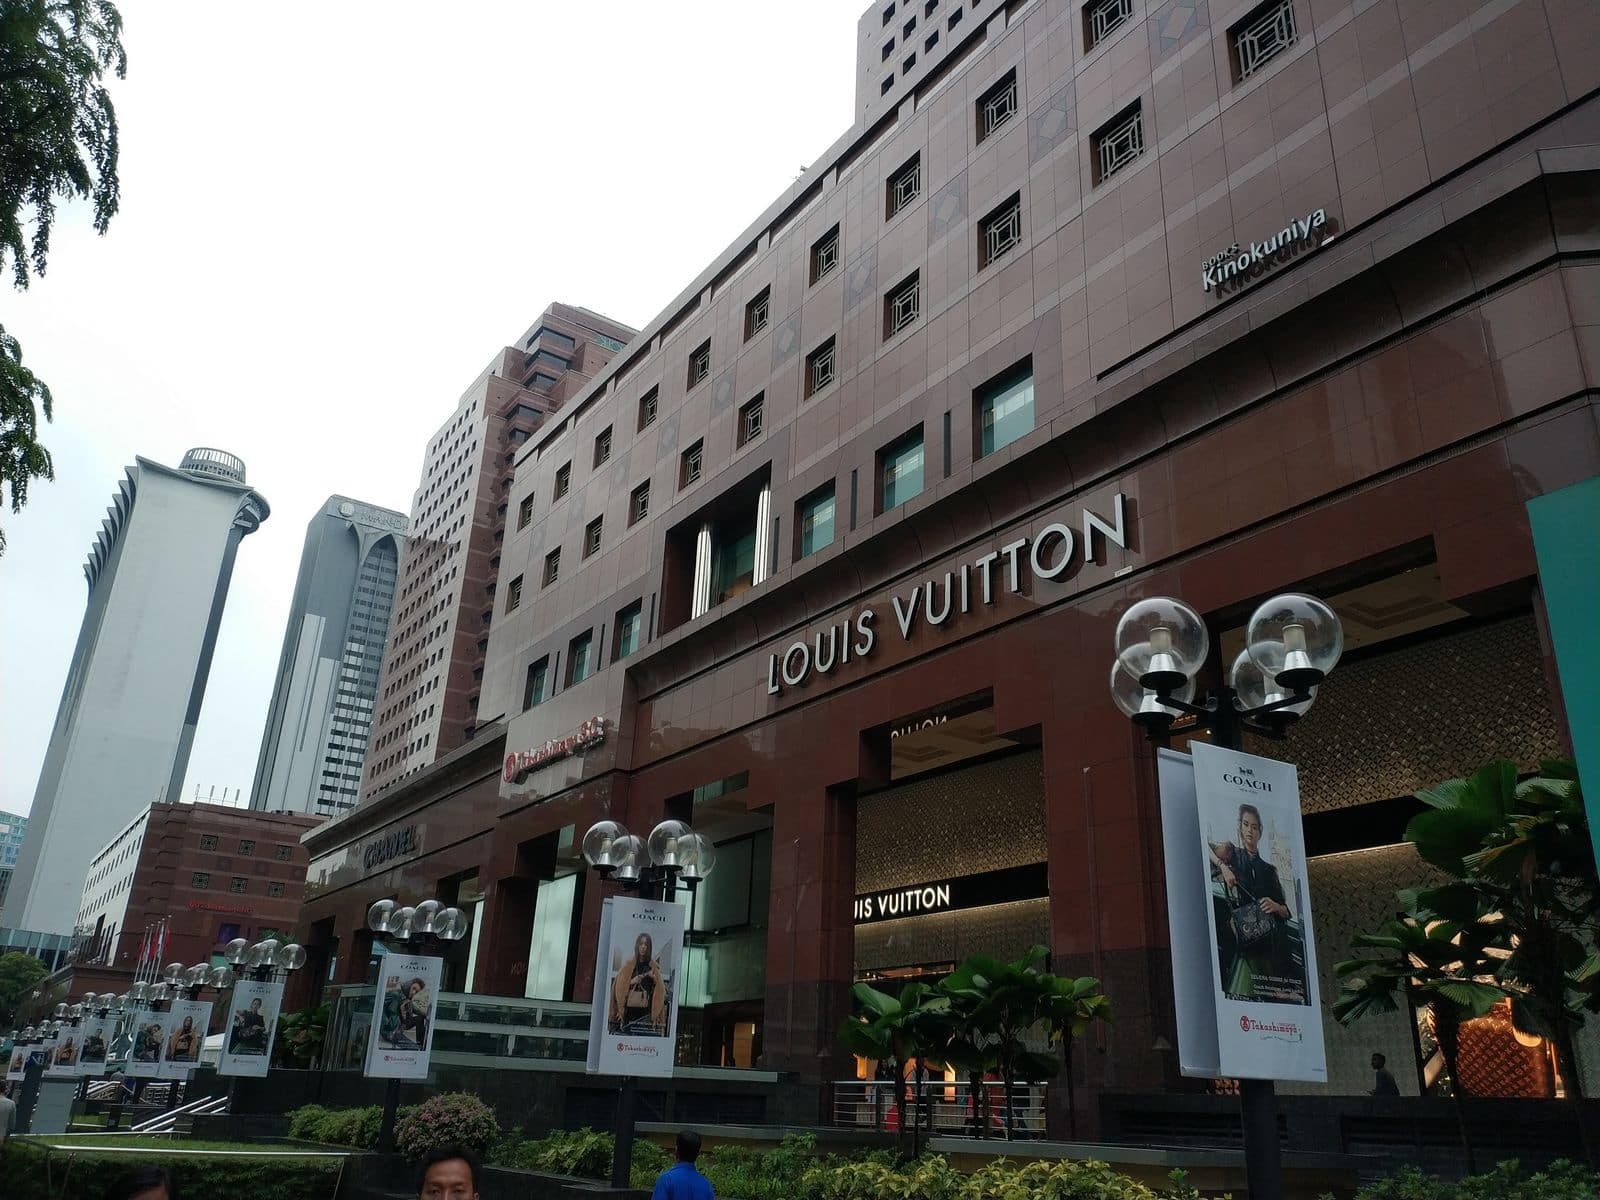 LOUIS VUITTON - 391, Orchard Rd, Singapore, Singapore - Leather